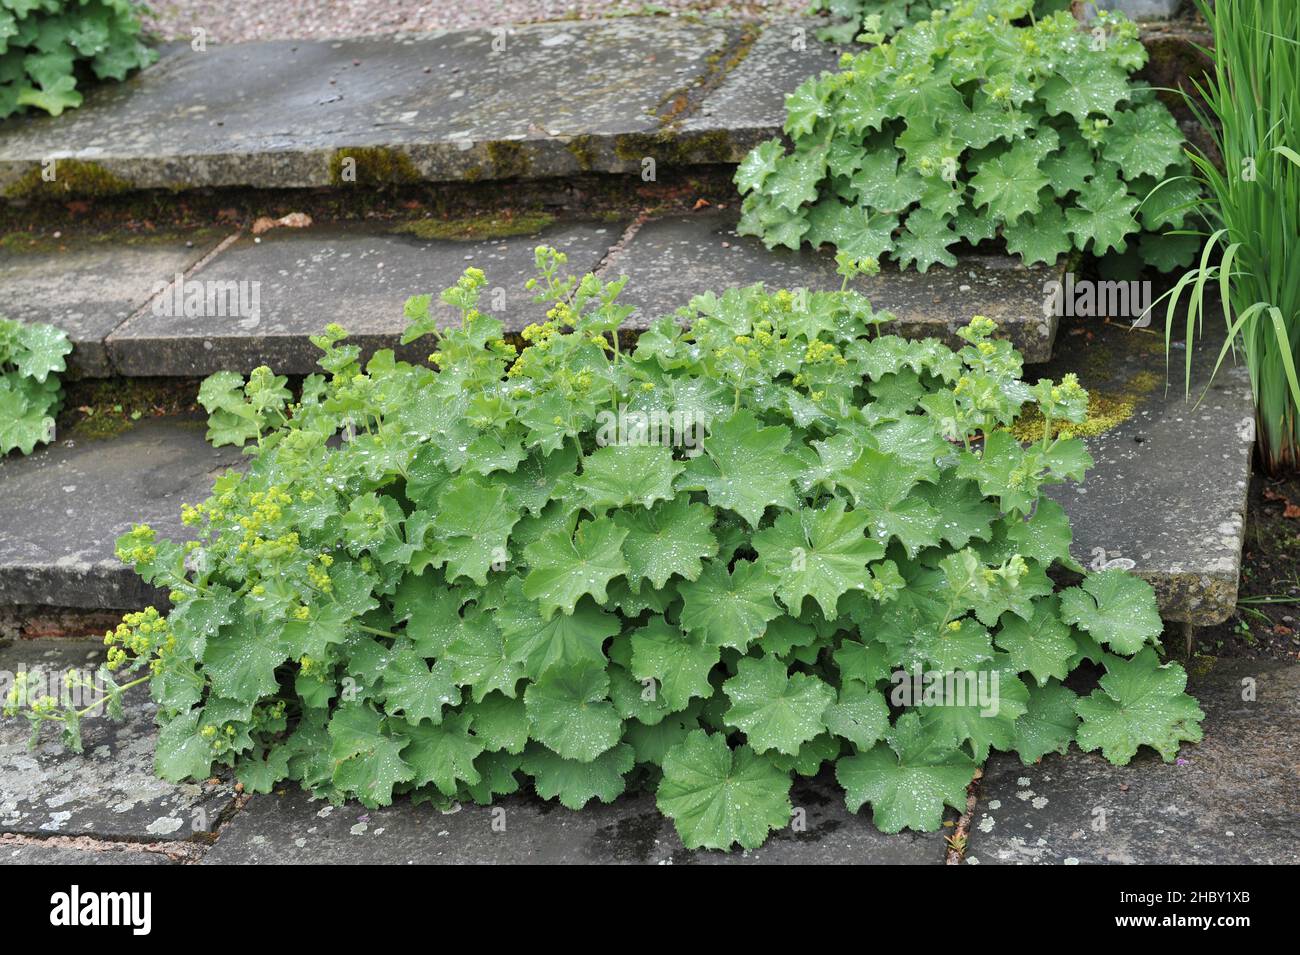 Lady's mantle (Alchemilla mollis) blooms on stone steps in a garden in May Stock Photo